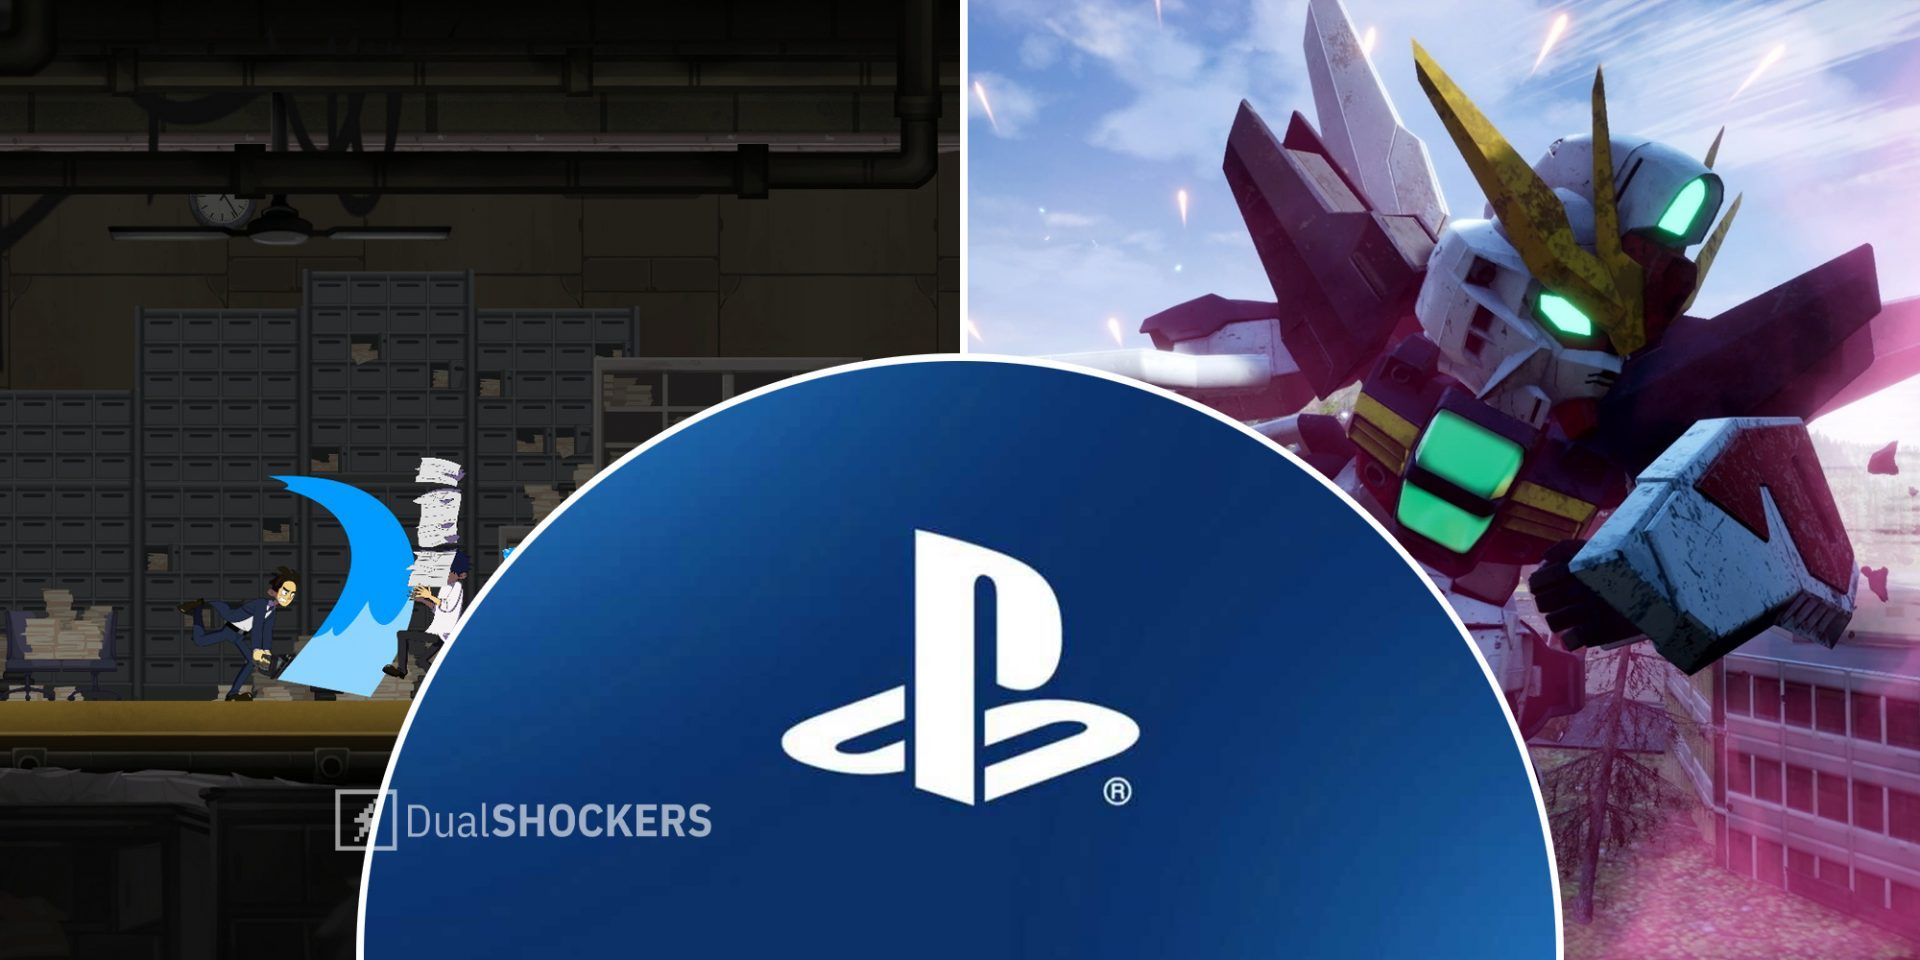 Playstation PS4 PS5 games The Company Man on left, Playstation logo in middle, SD Gundam Battle Alliance on right